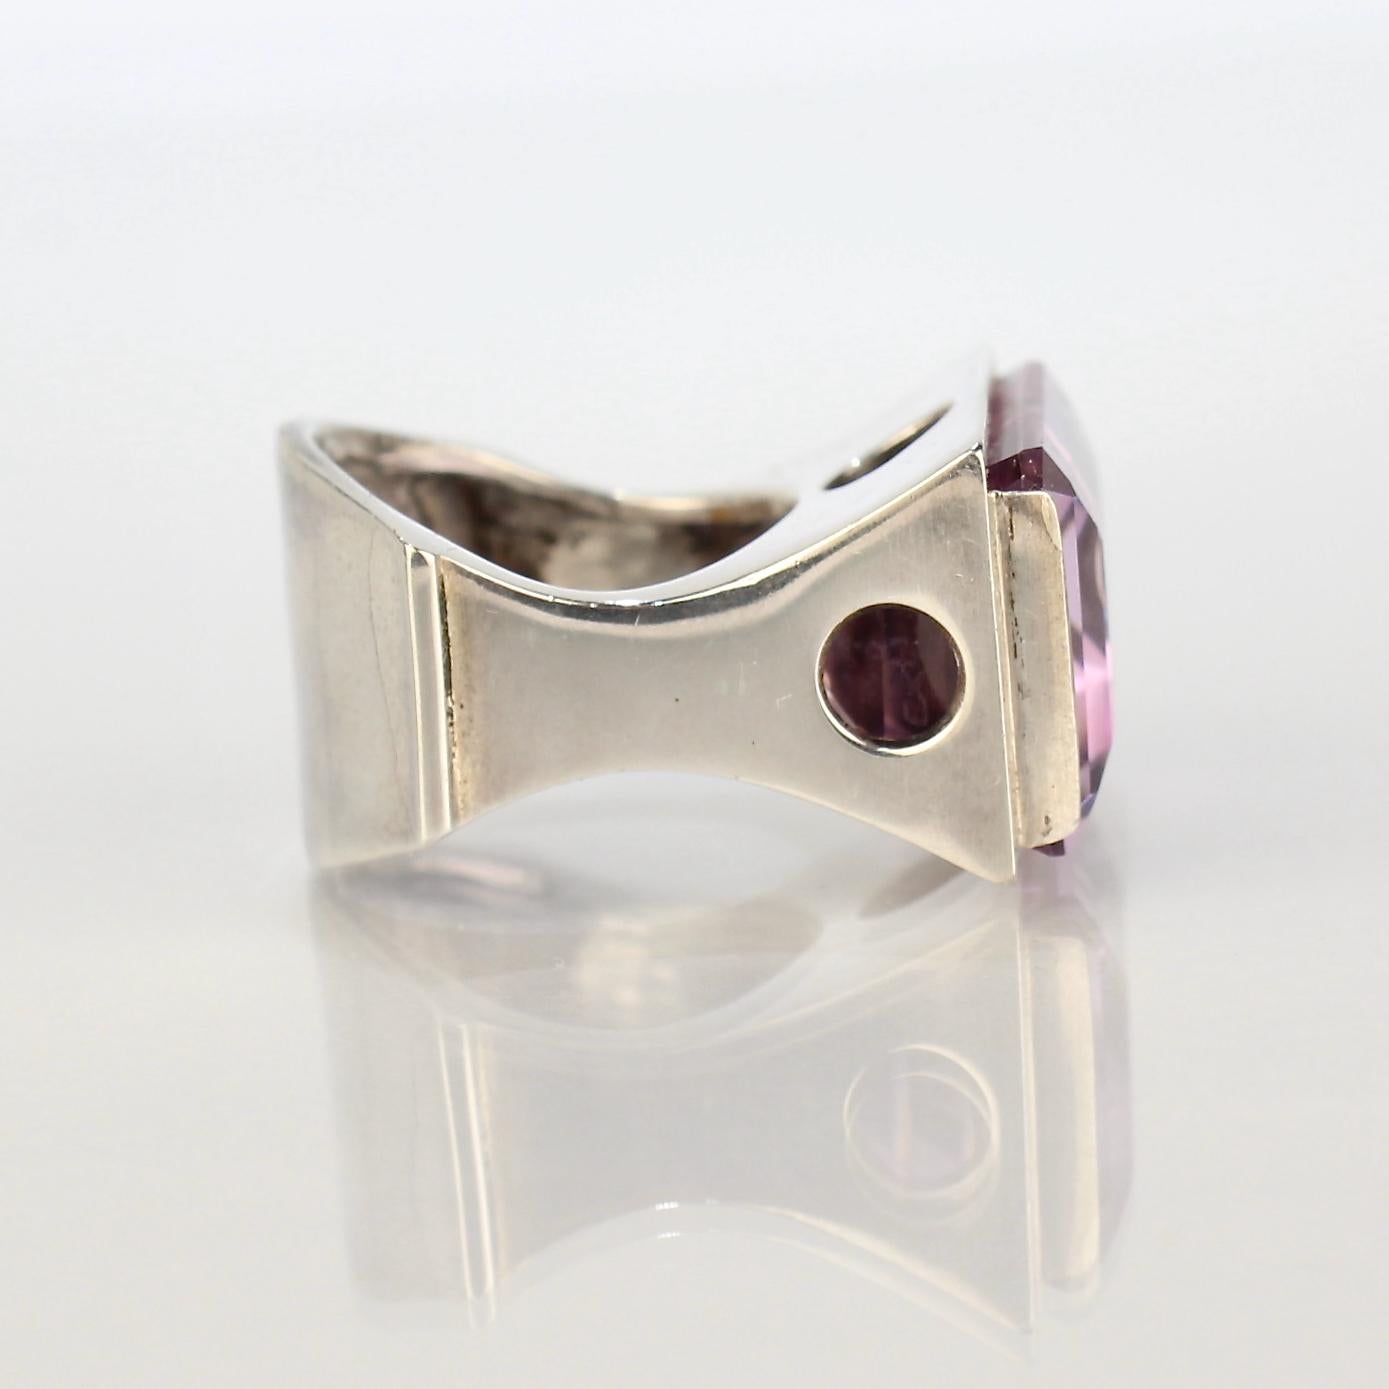 Emerald Cut Signed Wesley Emmons Mid-Century Modern Sterling Silver and Amethyst Ring, 1970s For Sale